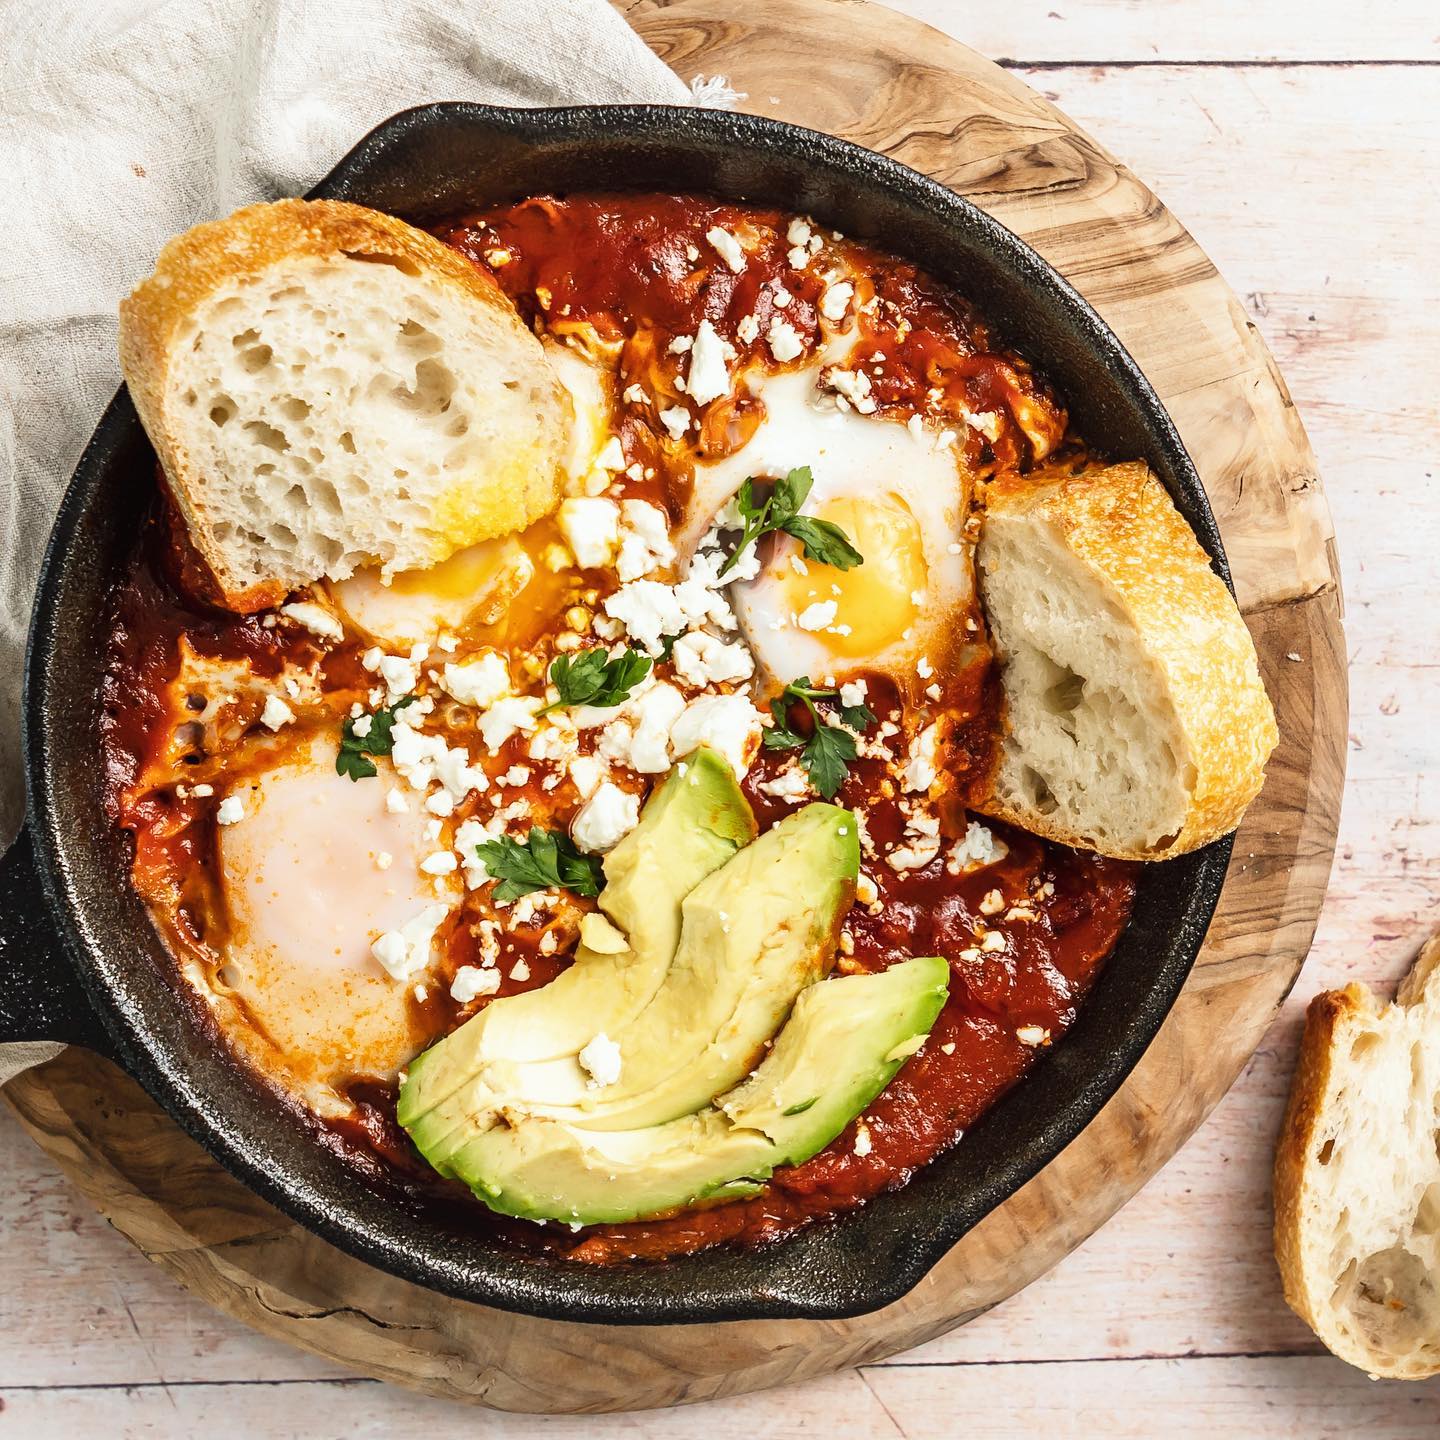 Here’s my super speedy 20minute Shakshuka recipe! Topped with avocado slices and crumbled feta. Served with chunky slices of sourdough! Perfect for weekend brunch 😍. Hit SAVE to give this a try 💛

Serve 2
Ready in 20 minutes

INGREDIENTS

1/2 tbsp olive oil
100g cherry tomatoes, halved
440g Tomato and basil pasta sauce (I used ZenB)
3 free range eggs
20g feta cheese
1 avocado, sliced
Sourdough slices, to serve

METHOD

1. Heat the olive oil in a small skillet or frying pan, add the cherry tomatoes and cook for 5 minutes until softened. Pour in the pasta sauce and stir through.
2. Make three wells in the sauce and crack in the eggs. Cover the pan with a lid and cook for 5-7 minutes until the egg white is starting to set and the yolk is gooey.
3. Place onto a serving board, crumble over the feta cheese and top with slices of avocado. Serve with fresh slices of sourdough bread for dipping.